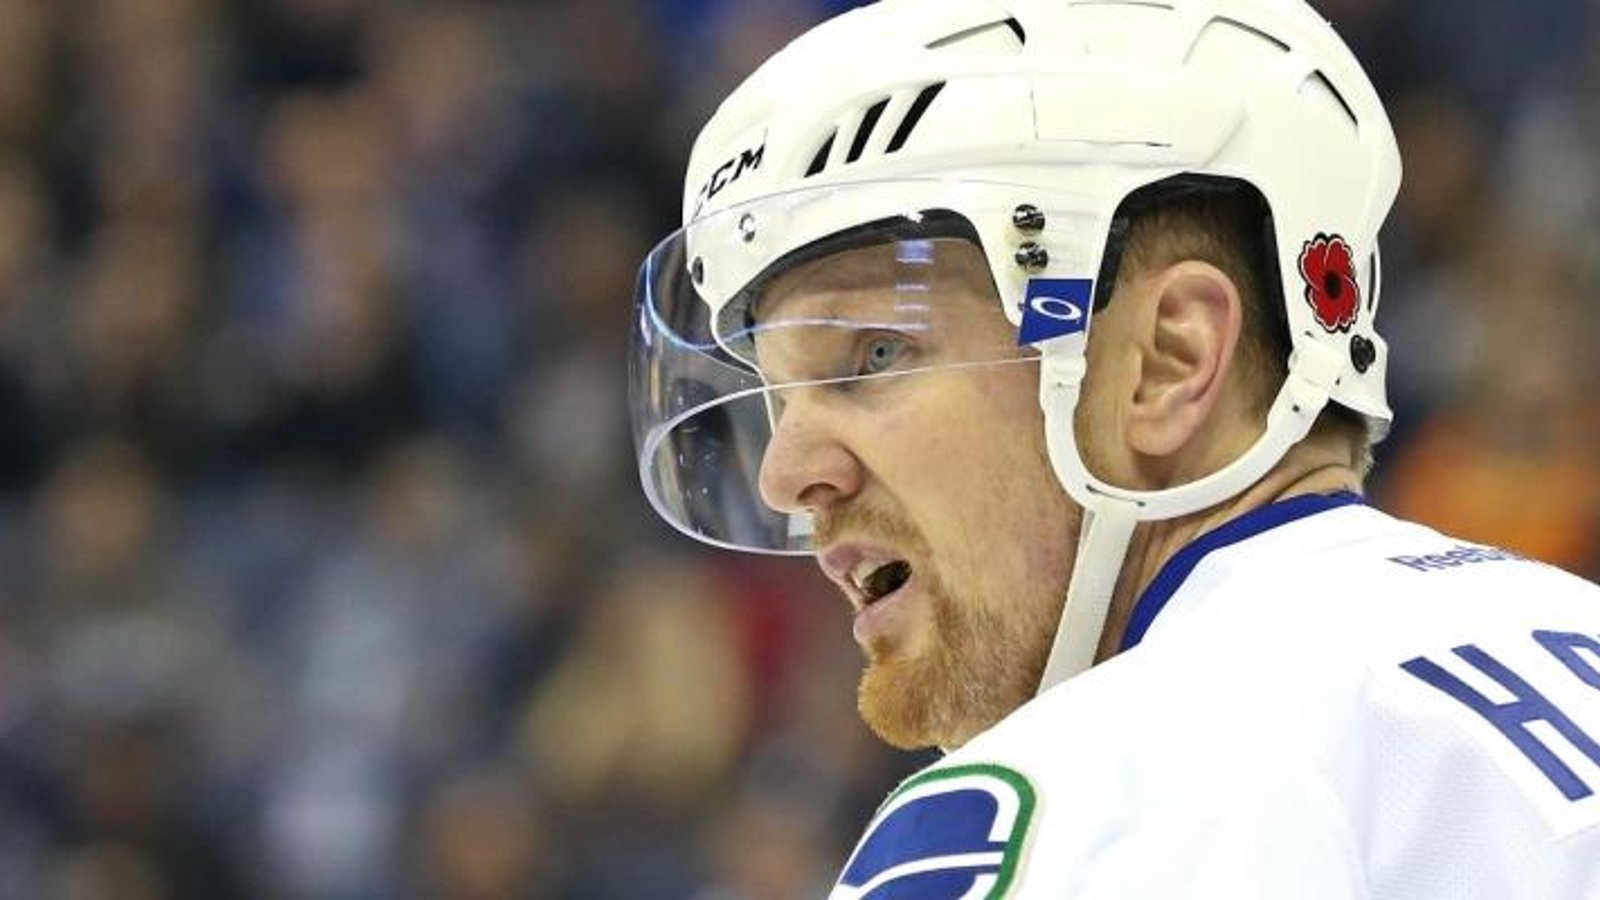 Breaking: Things don't sound good for Henrik Sedin and the Canucks.